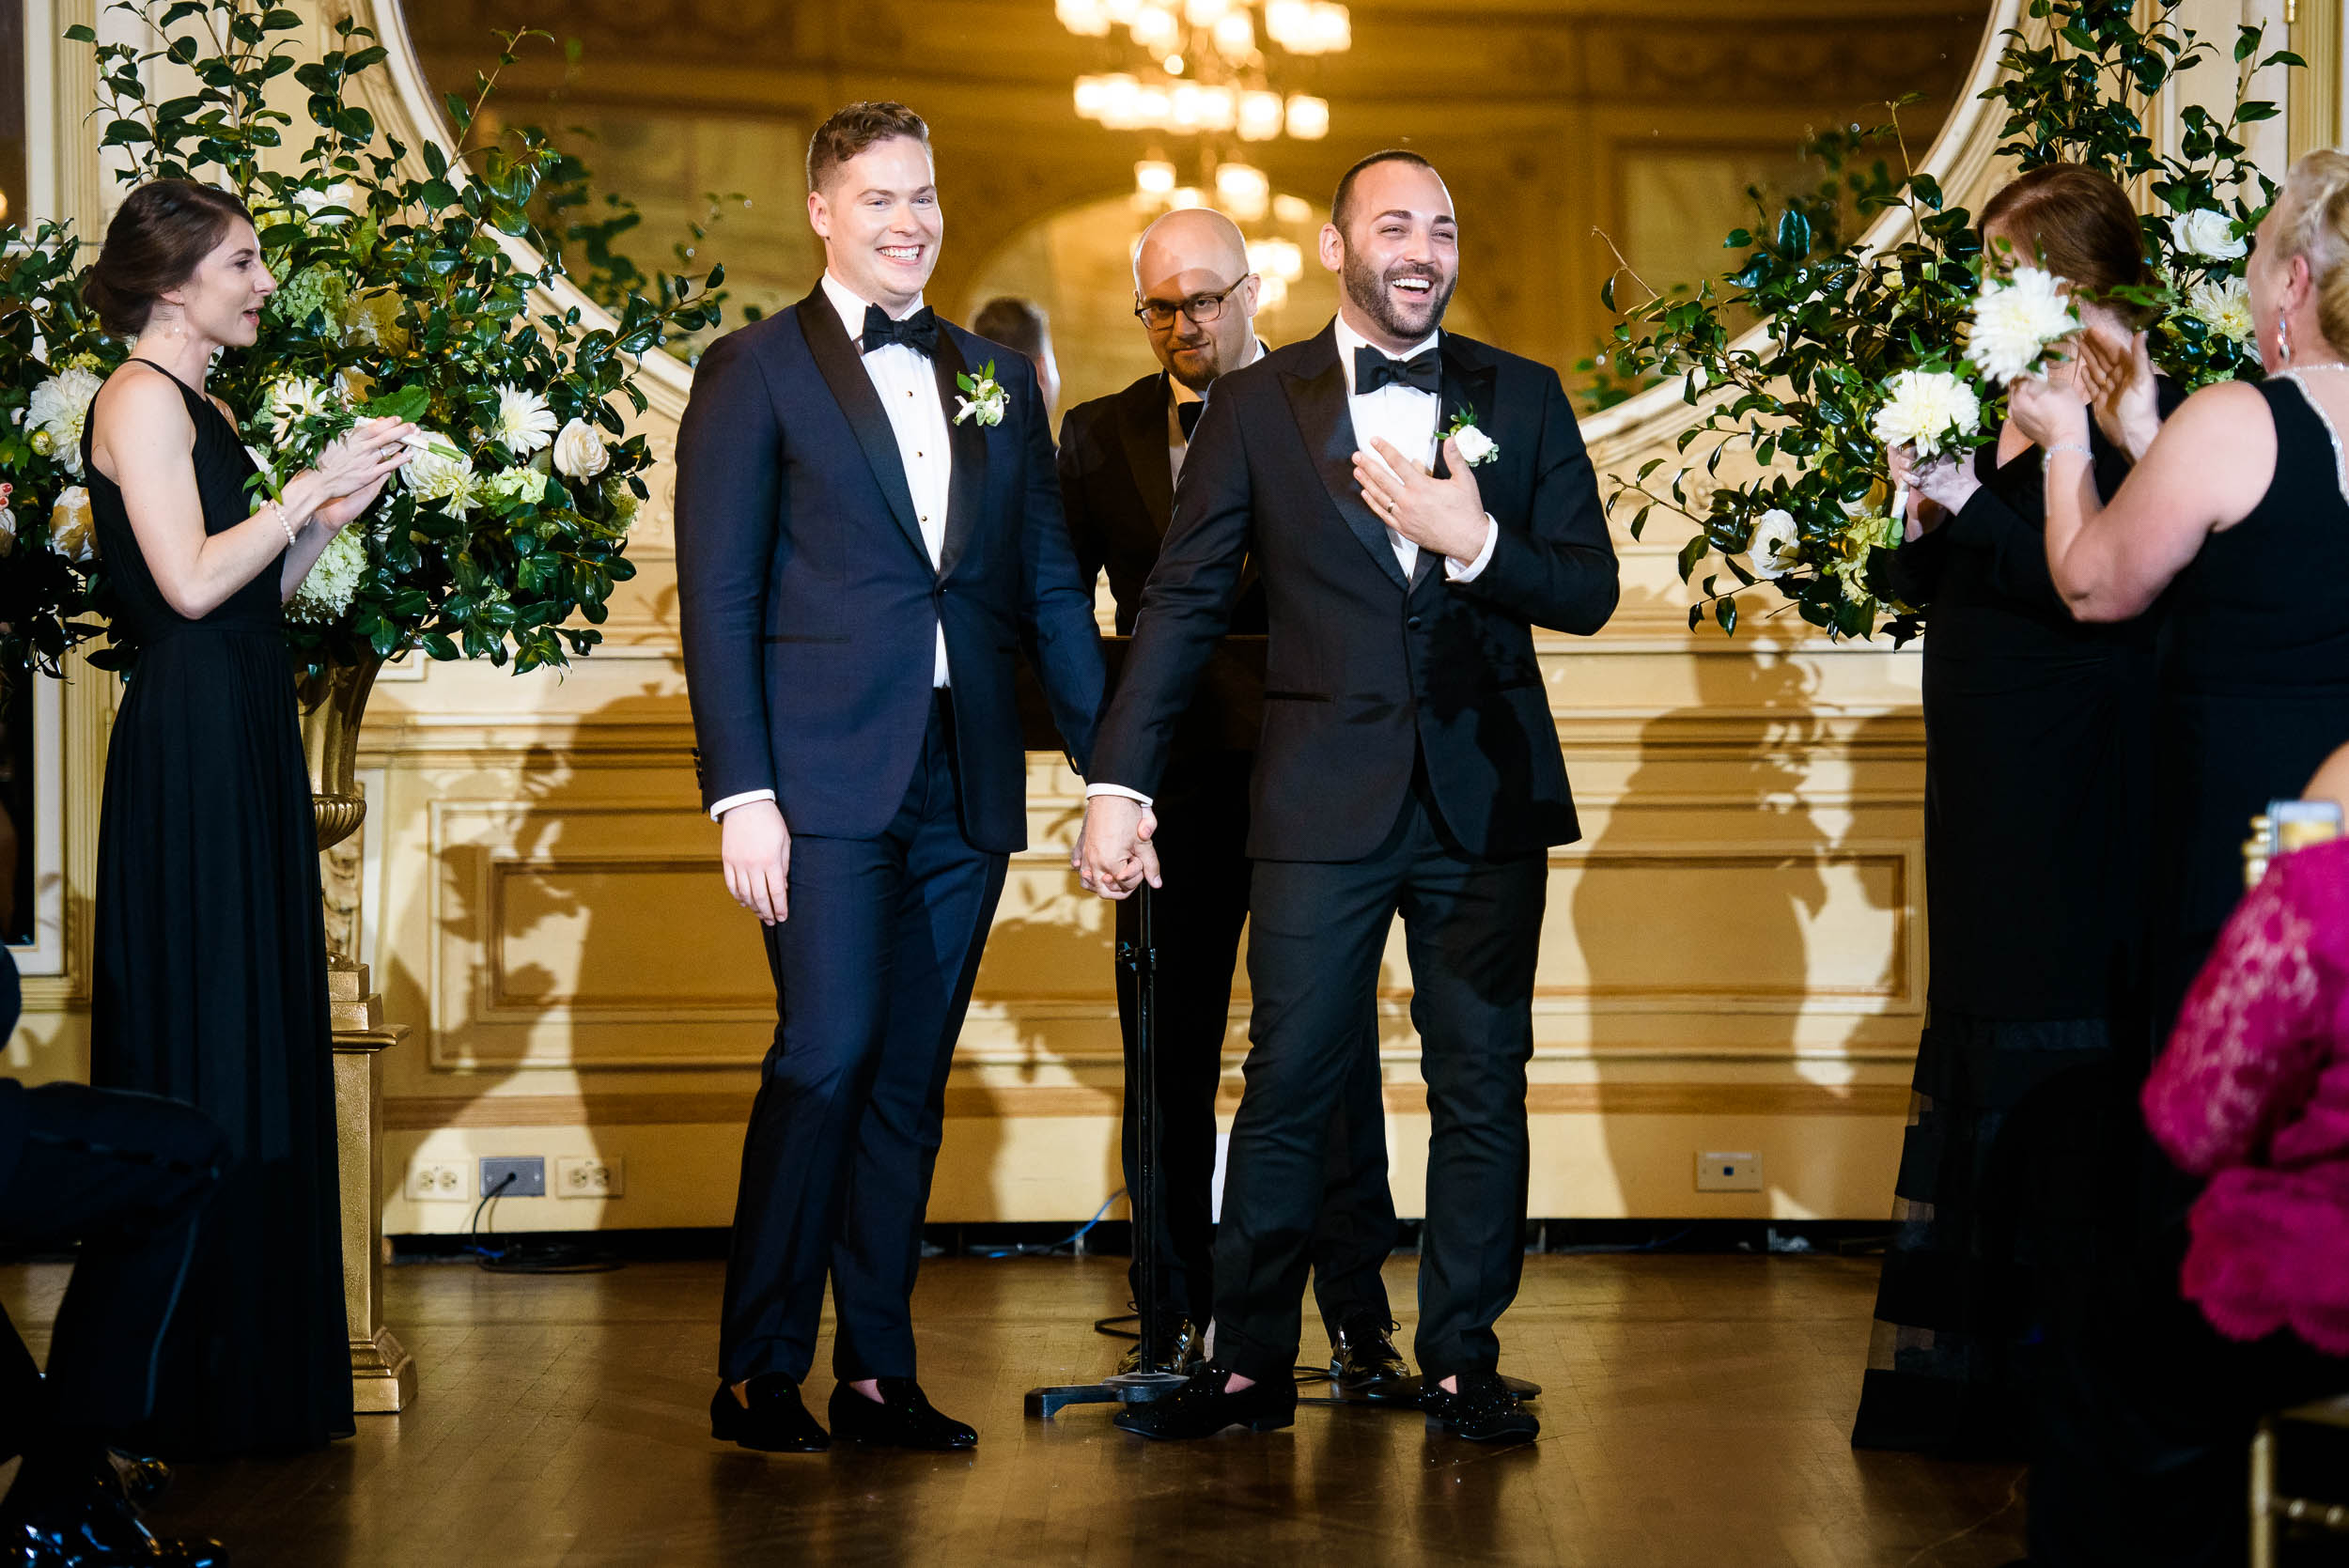 Same-sex wedding ceremony for luxurious fall wedding at the Chicago Symphony Center captured by J. Brown Photography. See more wedding ideas at jbrownphotography.com!